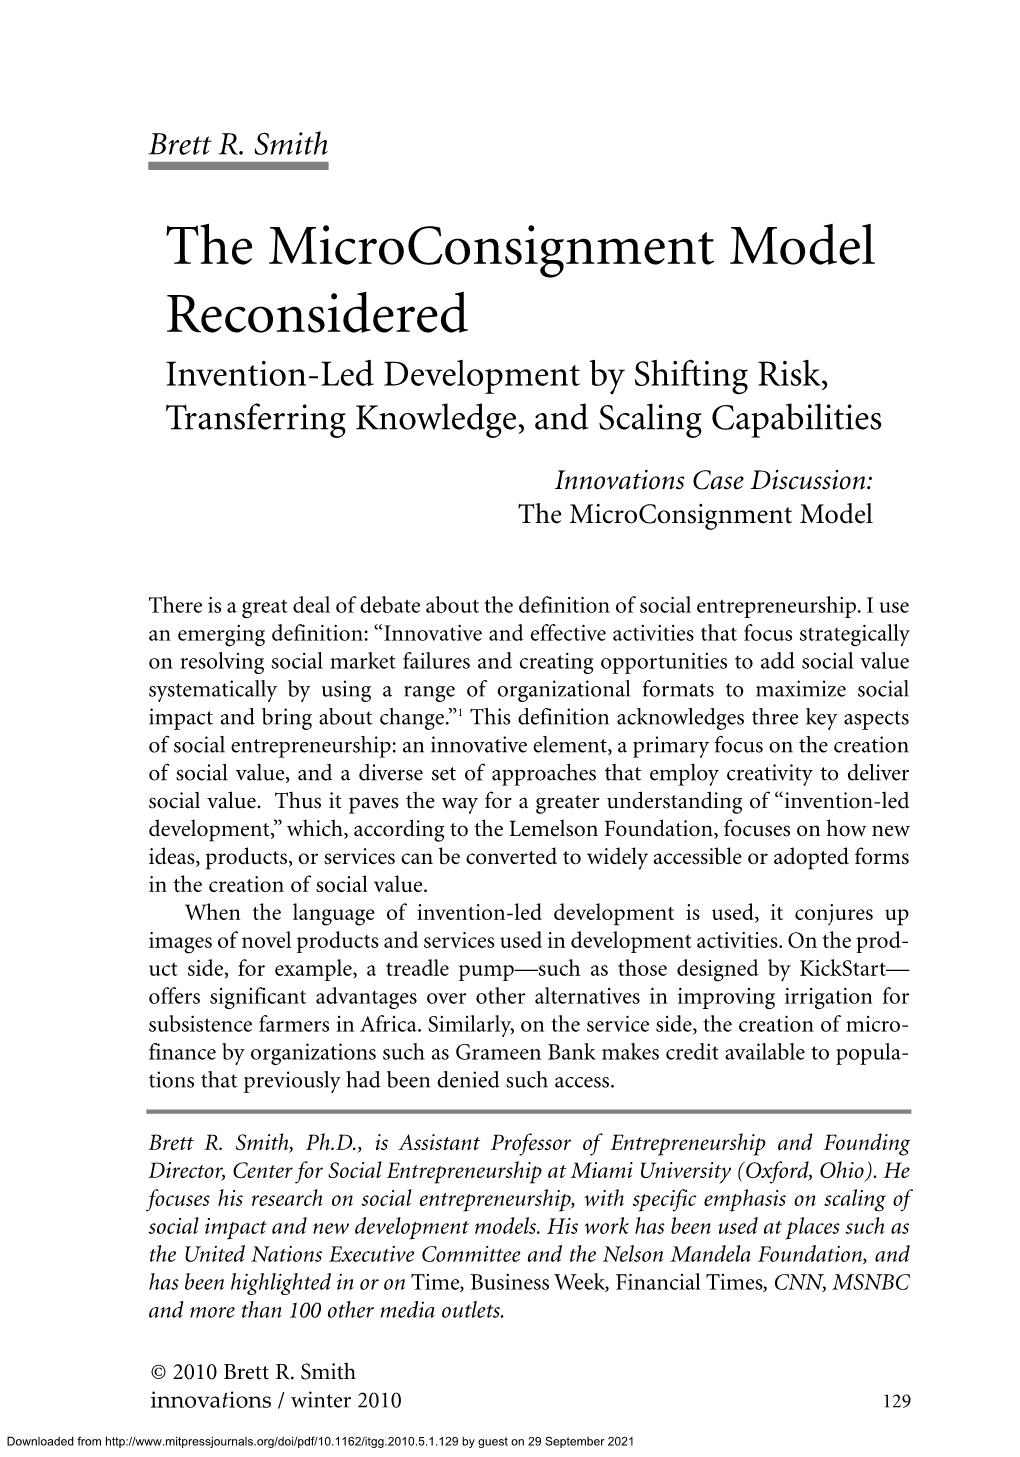 The Microconsignment Model Reconsidered Invention-Led Development by Shifting Risk, Transferring Knowledge, and Scaling Capabilities